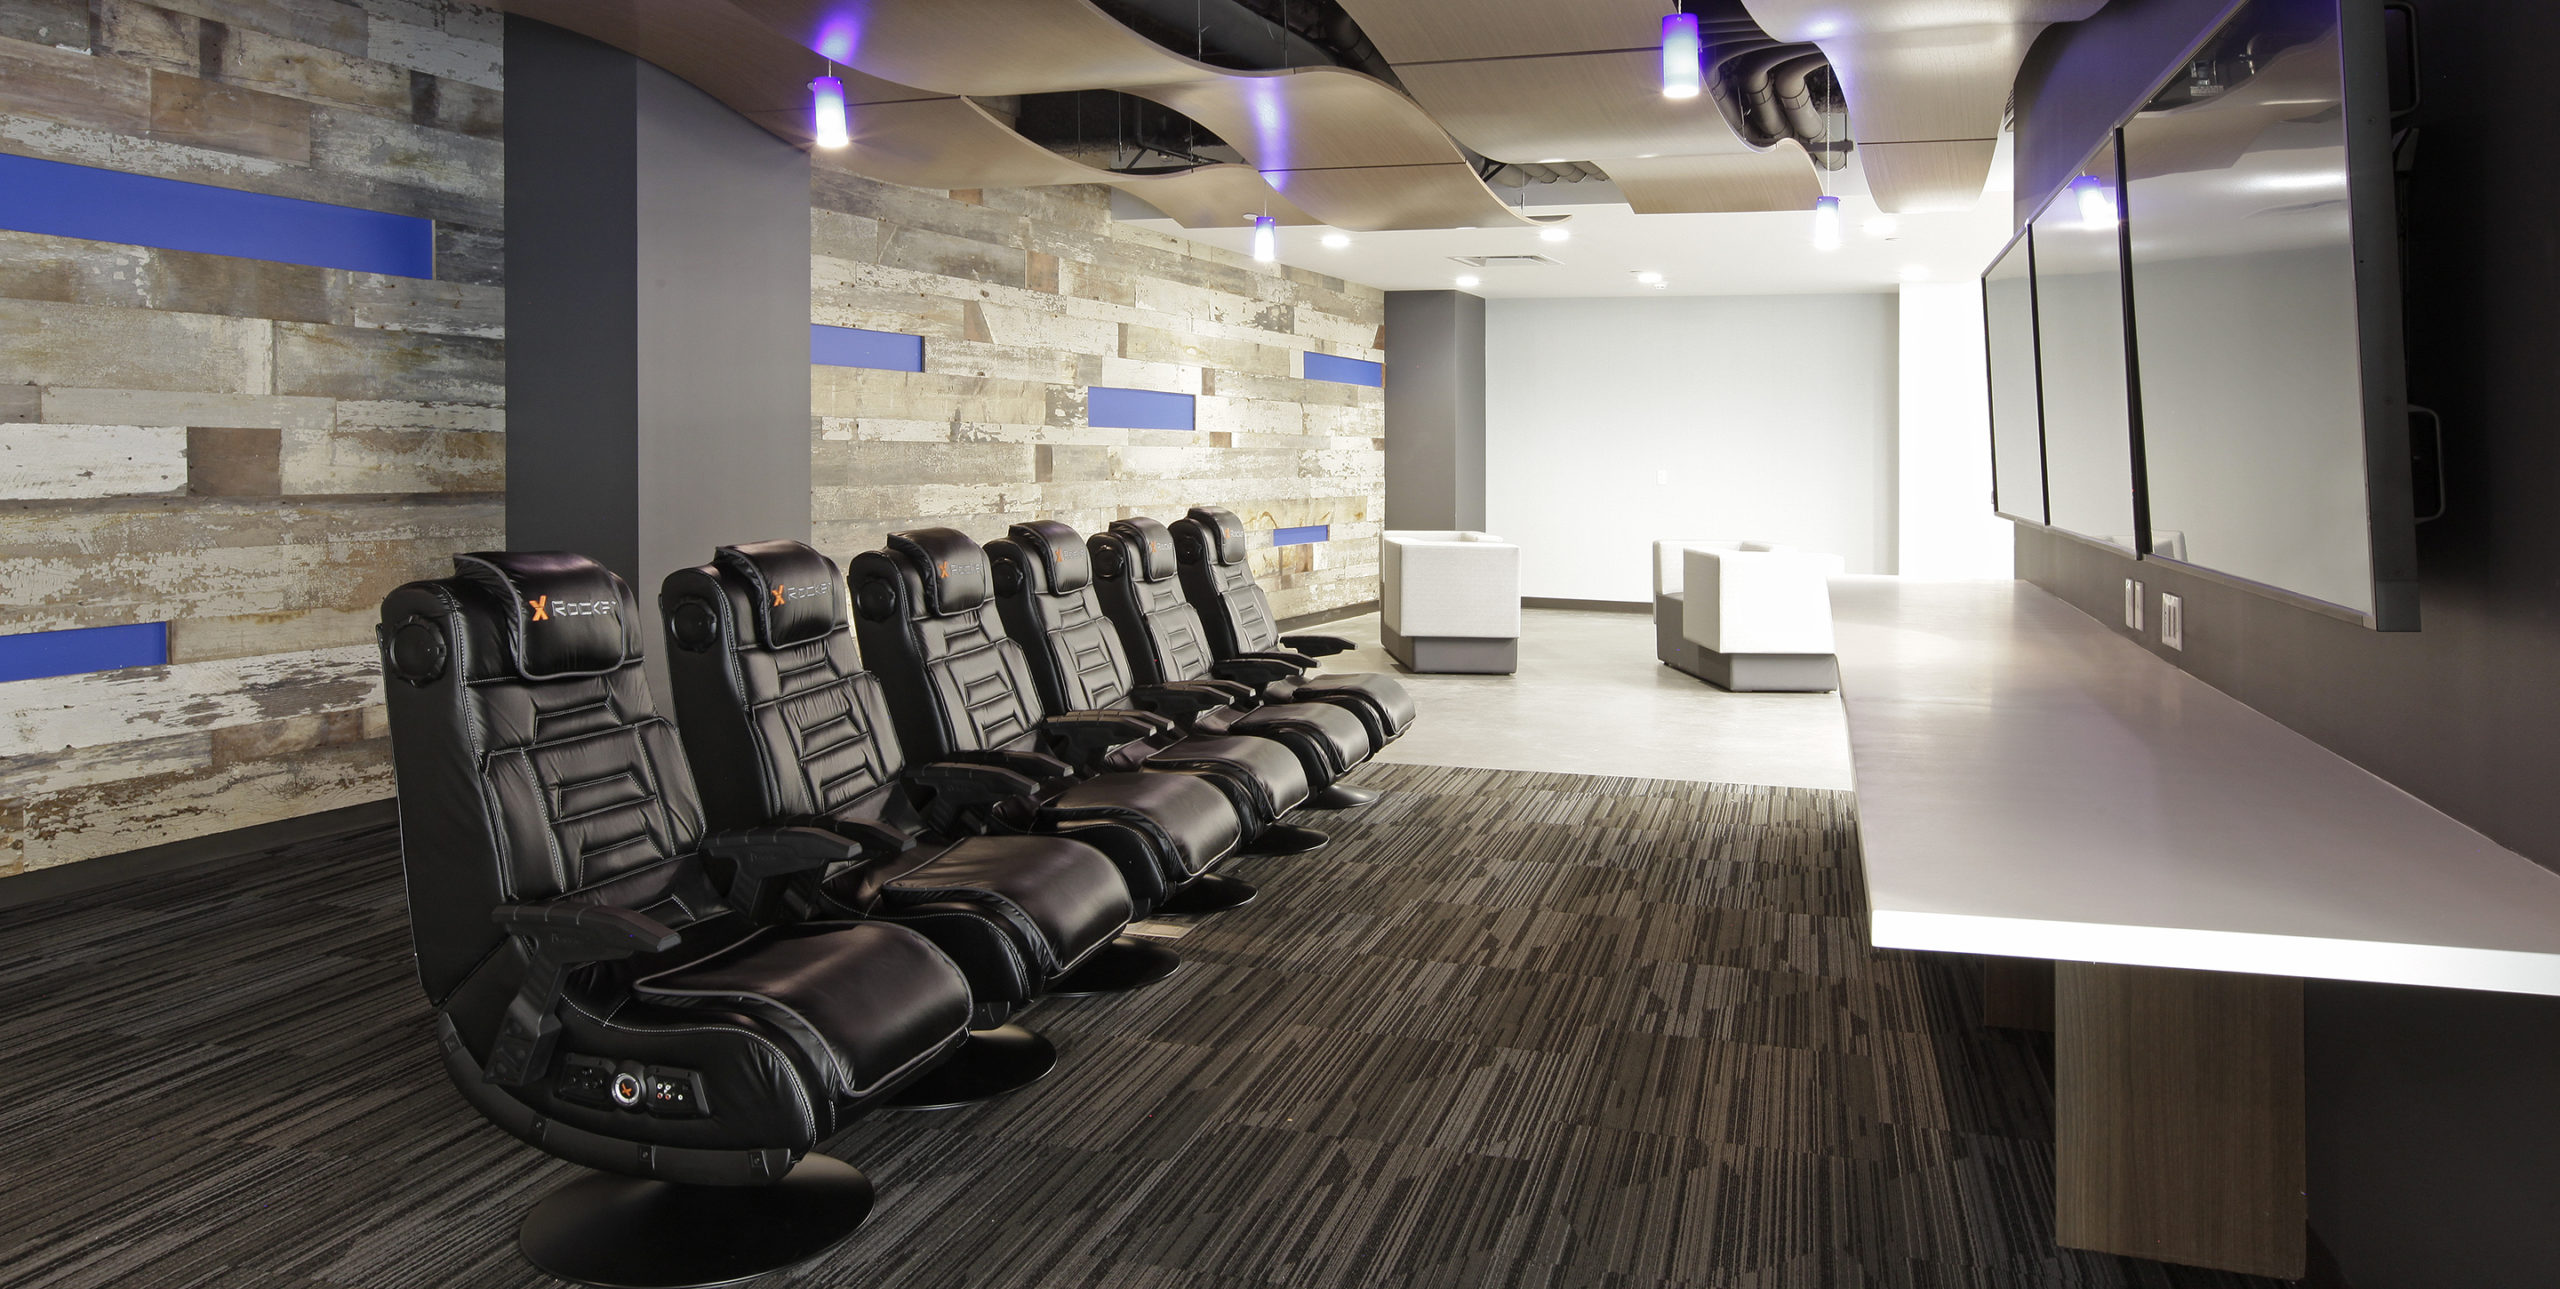 Gaming chairs in front of TVs at Dealertrack Technologies